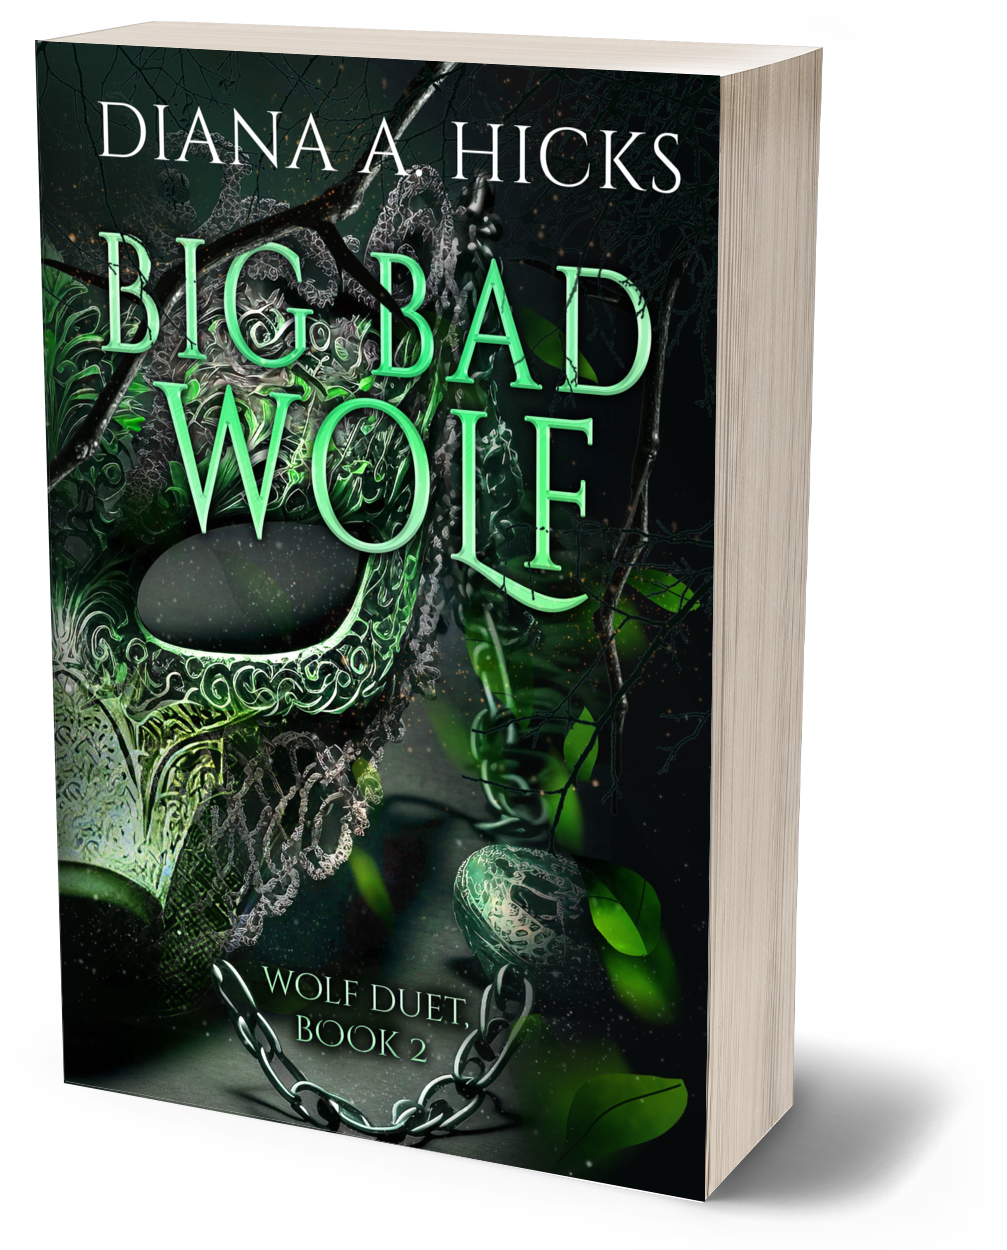 Big Bad Wolf: Special Edition Cover (The Society Book 4)